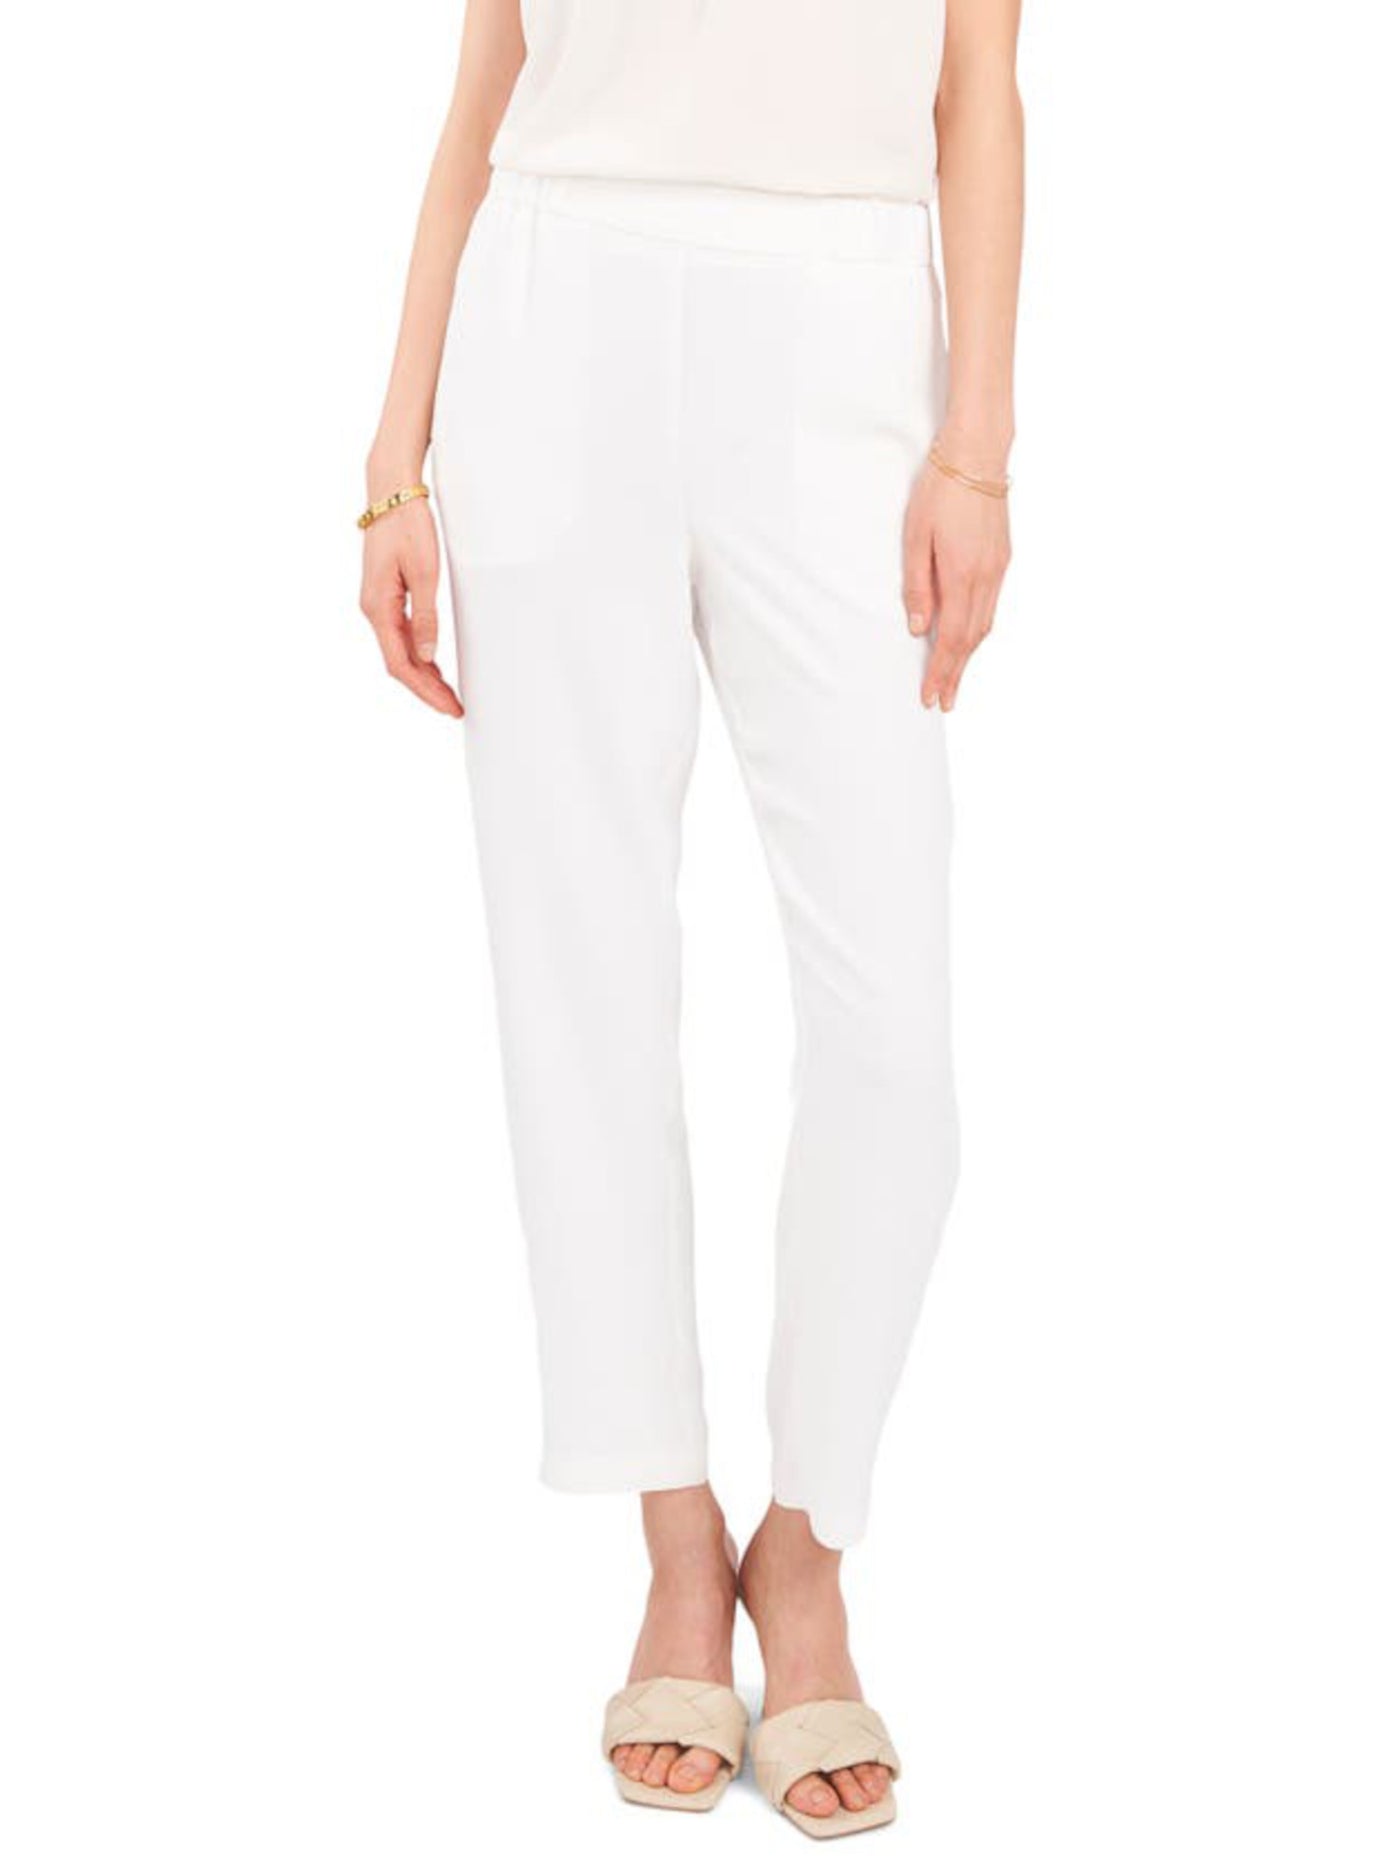 VINCE CAMUTO Womens Ivory Pocketed Unlined Pull On Elastic Waist Wear To Work Straight leg Pants M